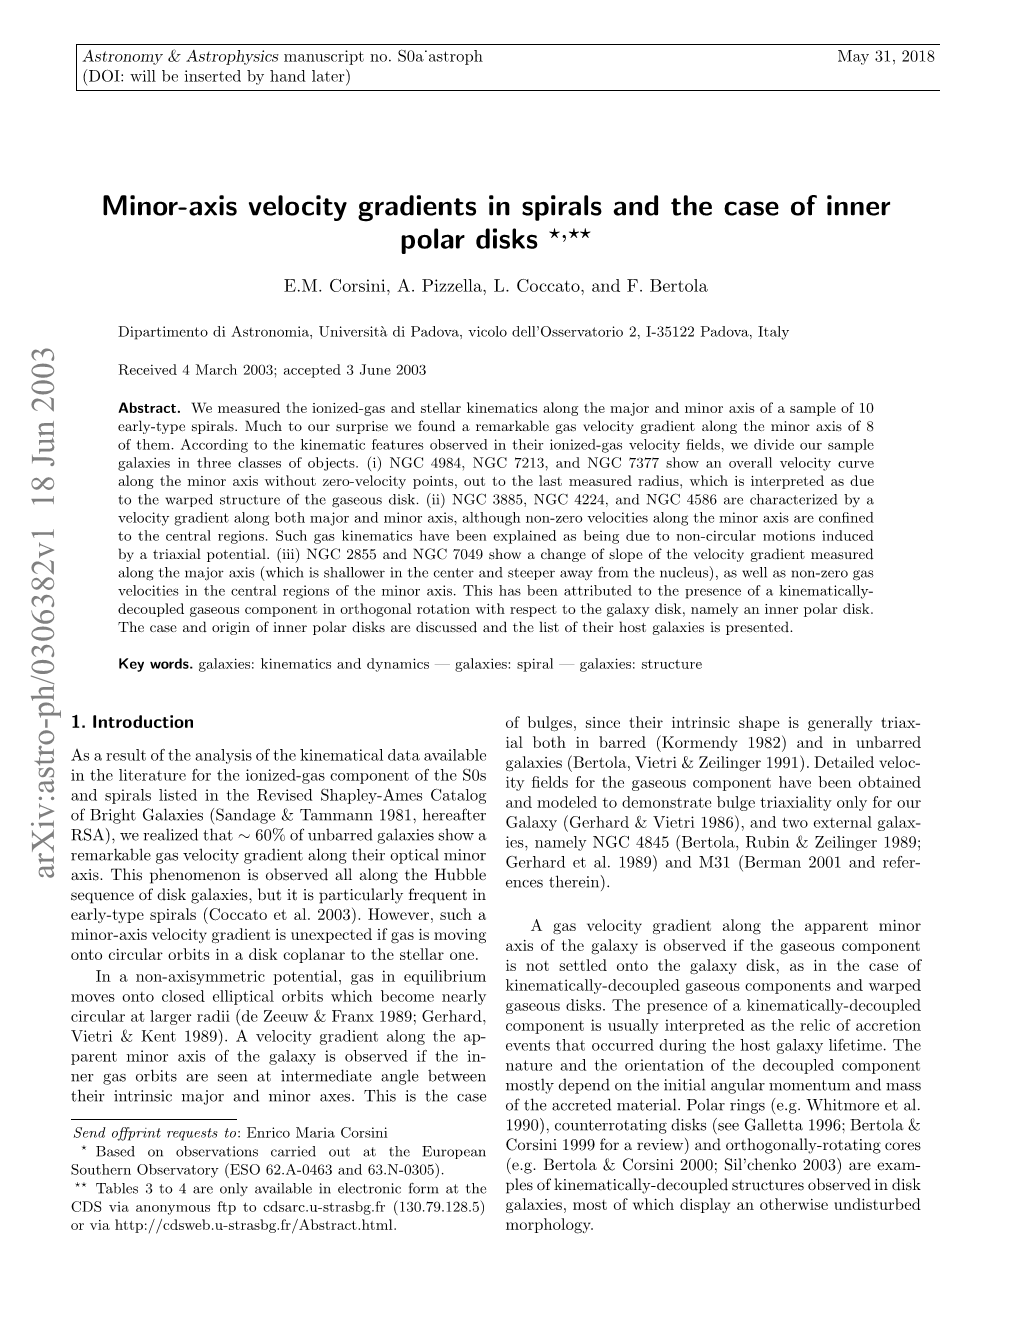 Minor-Axis Velocity Gradients in Spirals and the Case of Inner Polar Disks